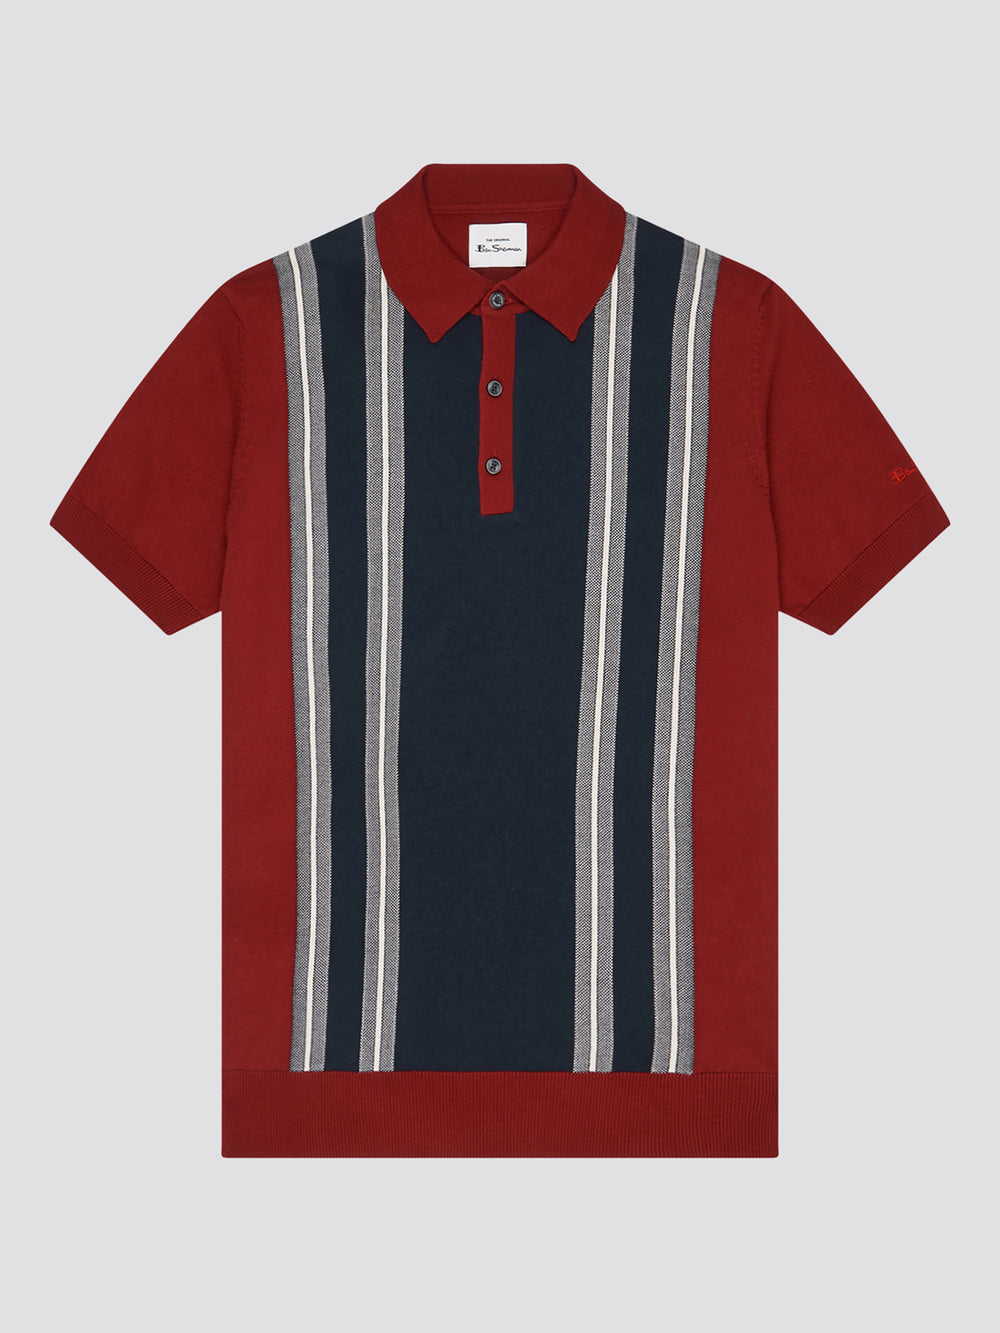 Ben Sherman, Mod Knit Polo, Men's Sweater Polo, Retro Stripe Shirt, Red and blue, front